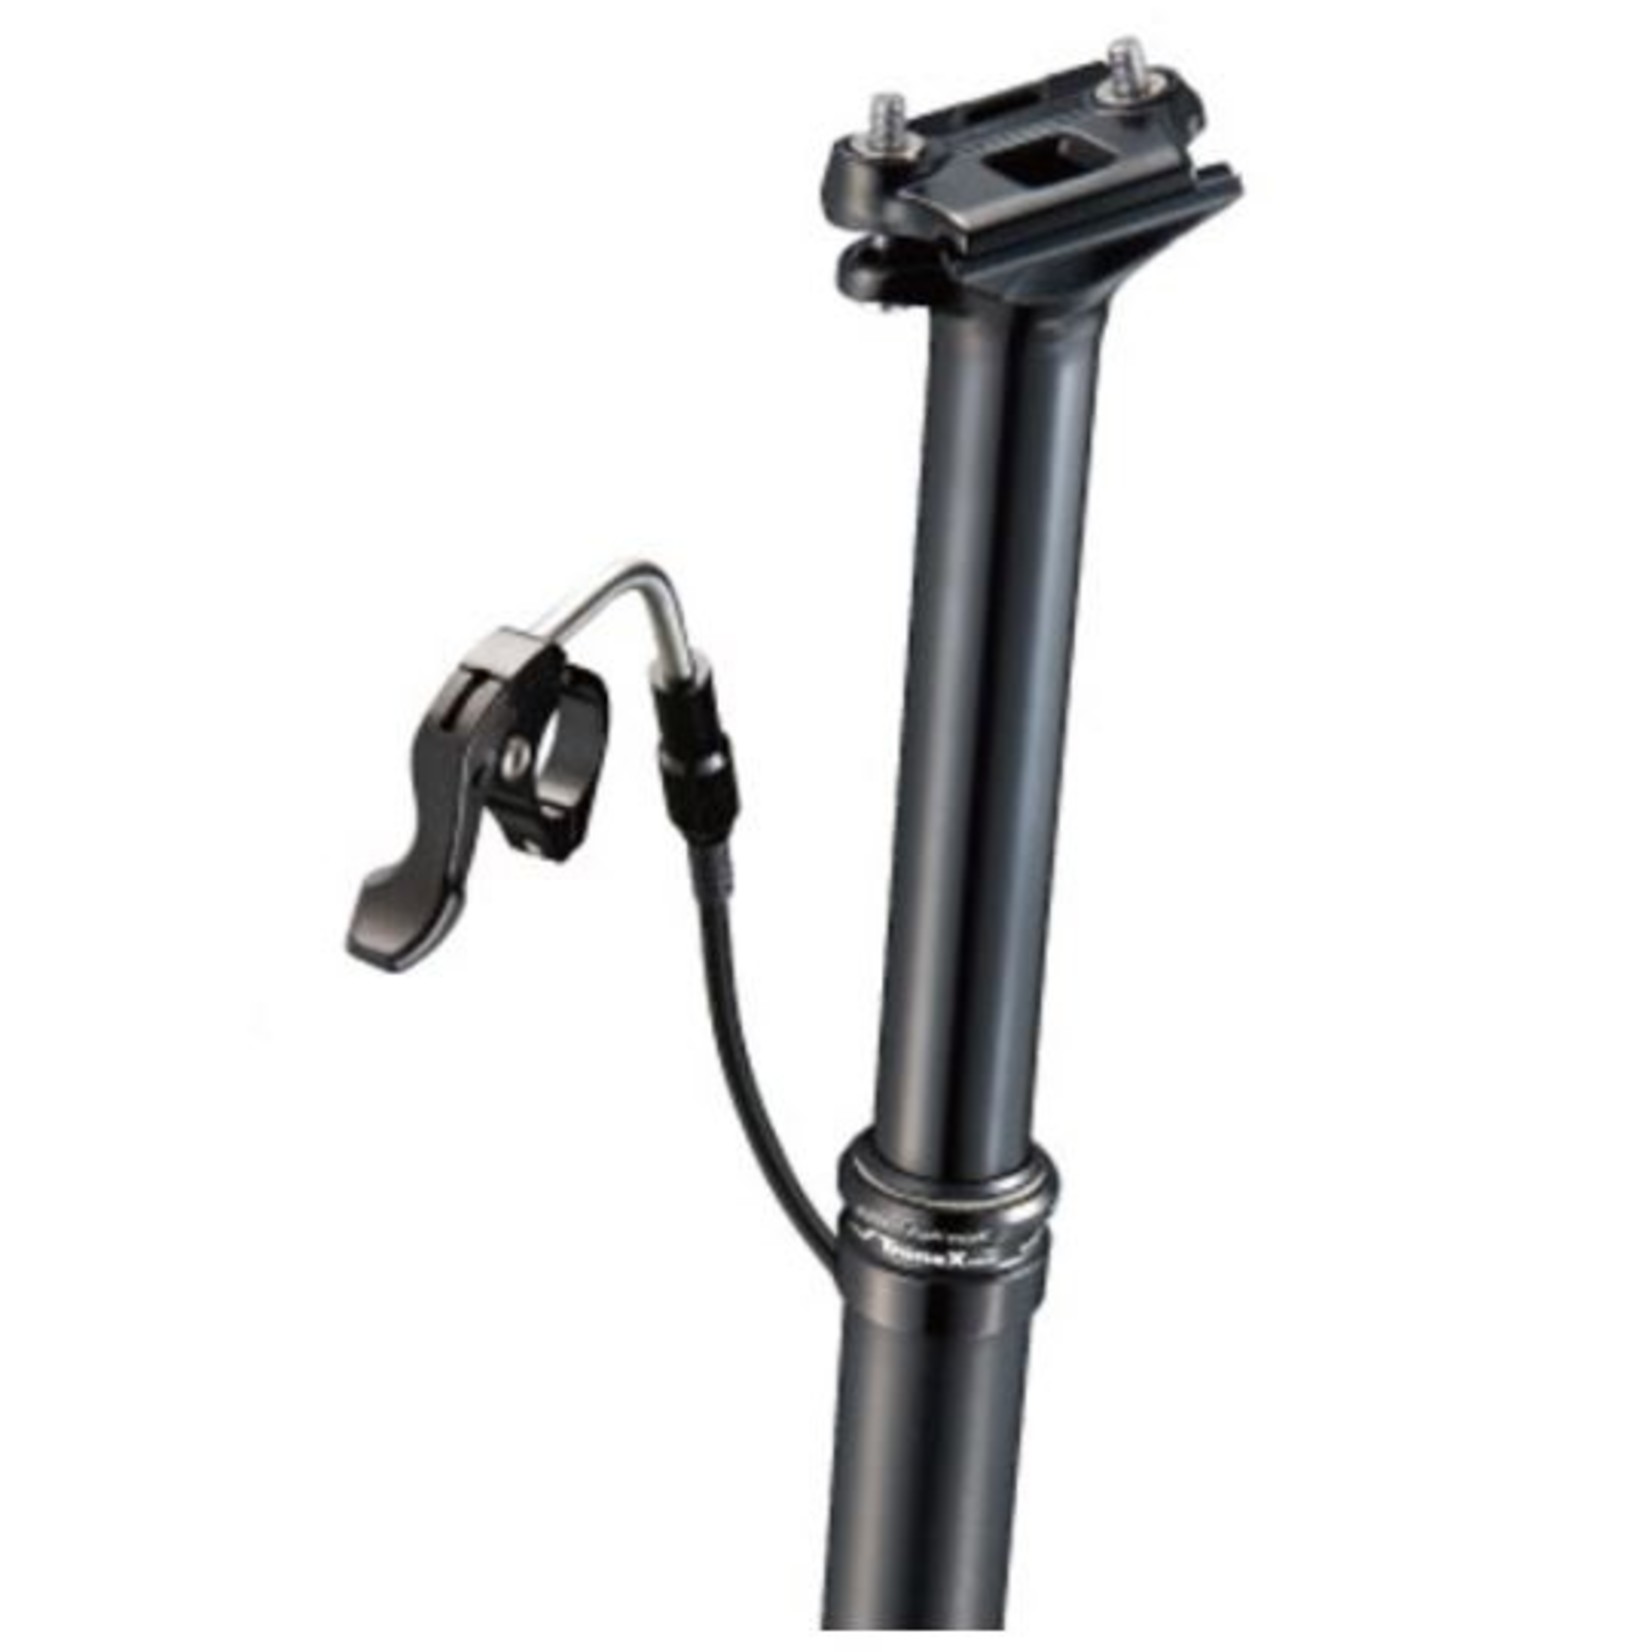 Tranzx Tranzx Bicycle Dropper Seatpost - Internal Routed Cable - 34.9mm - 150mm Travel